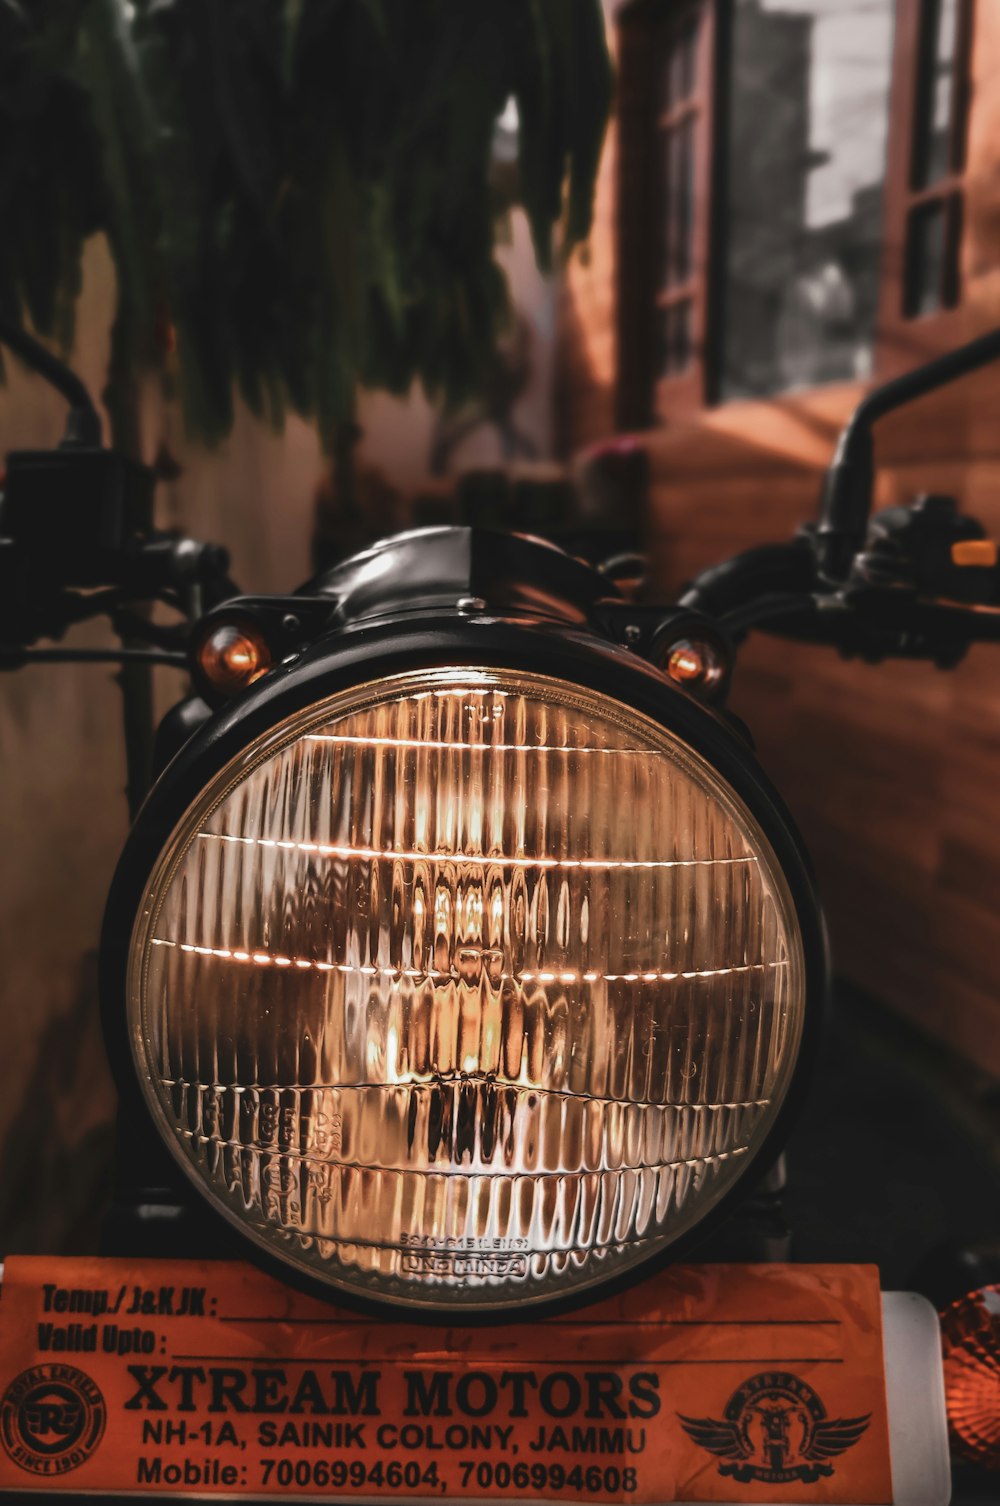 a close up of a headlight on a motorcycle